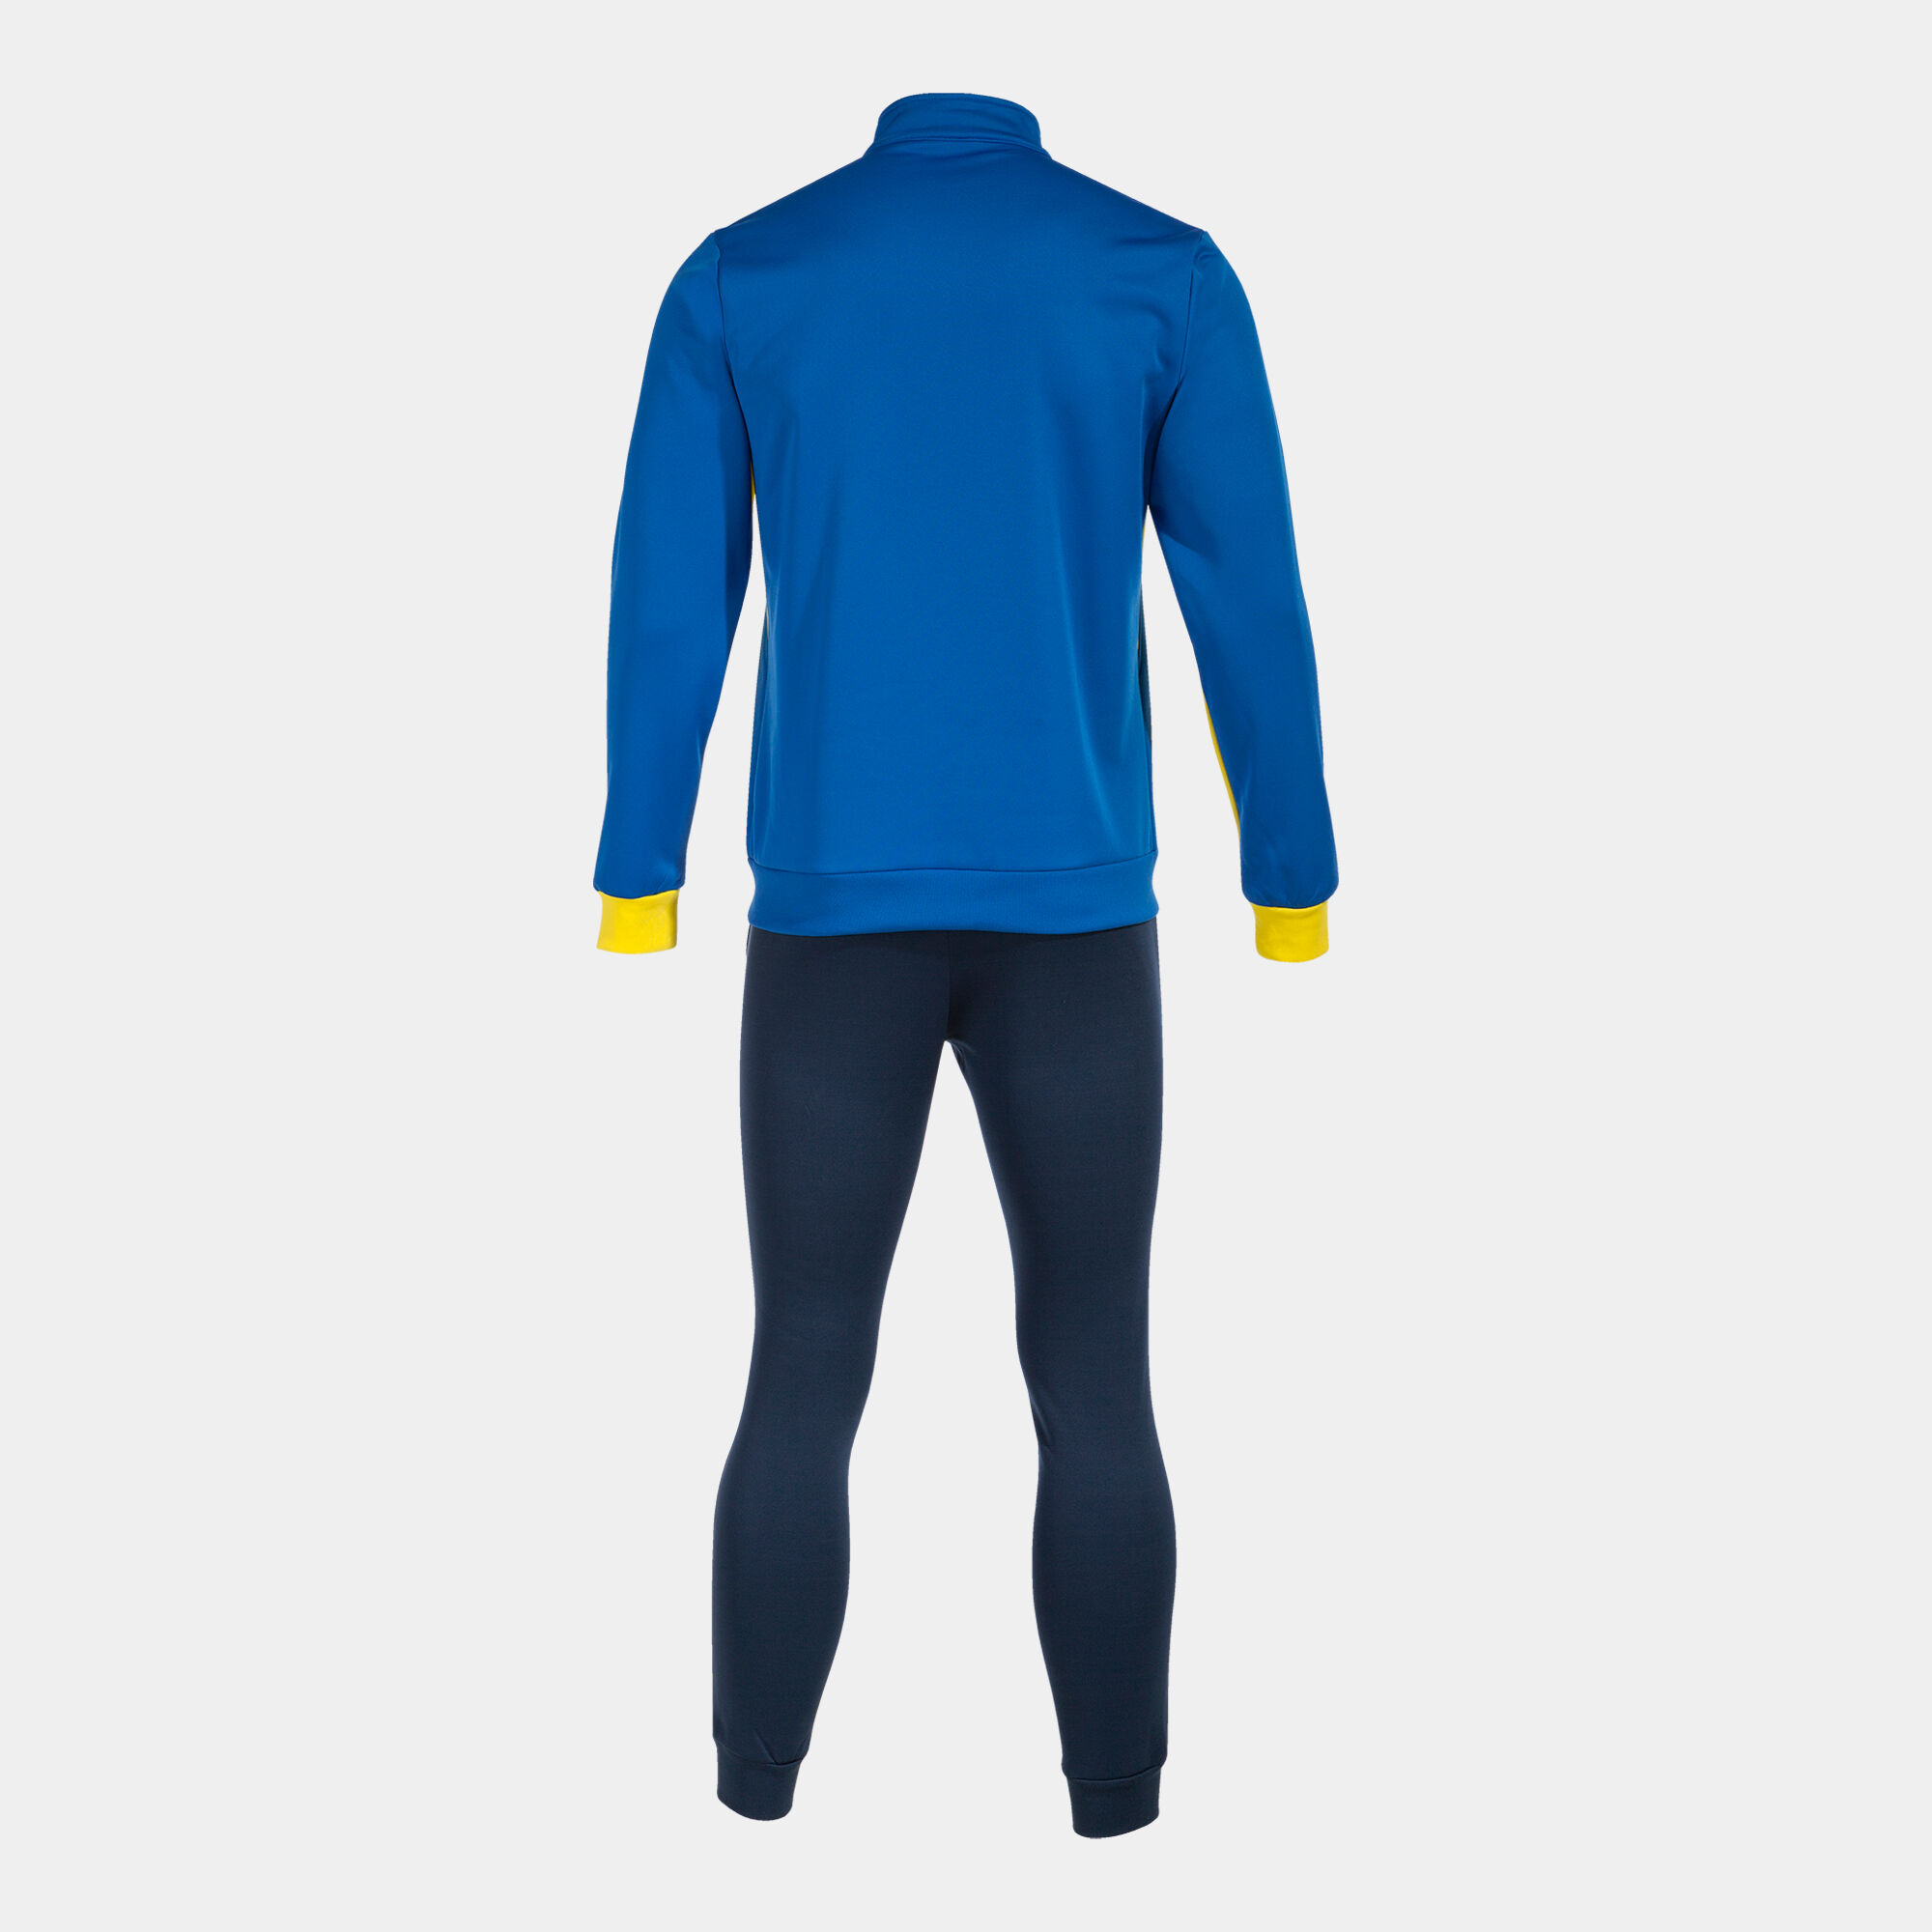 Tracksuit man Derby royal blue yellow